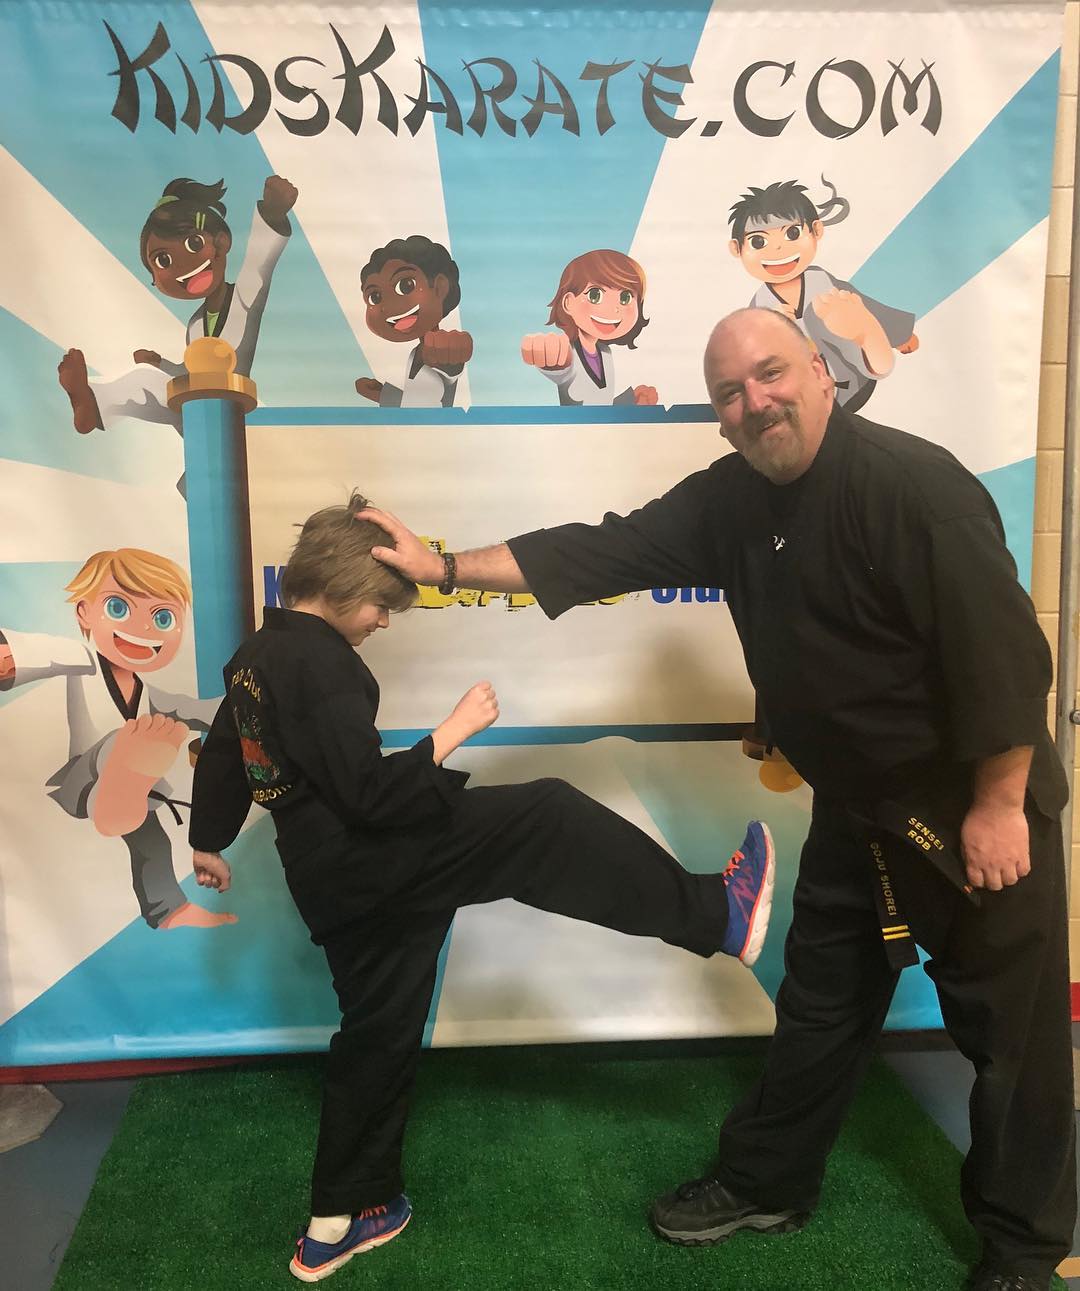 He may be a black belt but my son isn’t tall enough to get in a Mae geri on his old man! #kidskarate #karate #training #martialarts #tournament #prouddad #lotd #funny #maybenextyear #gojushorei